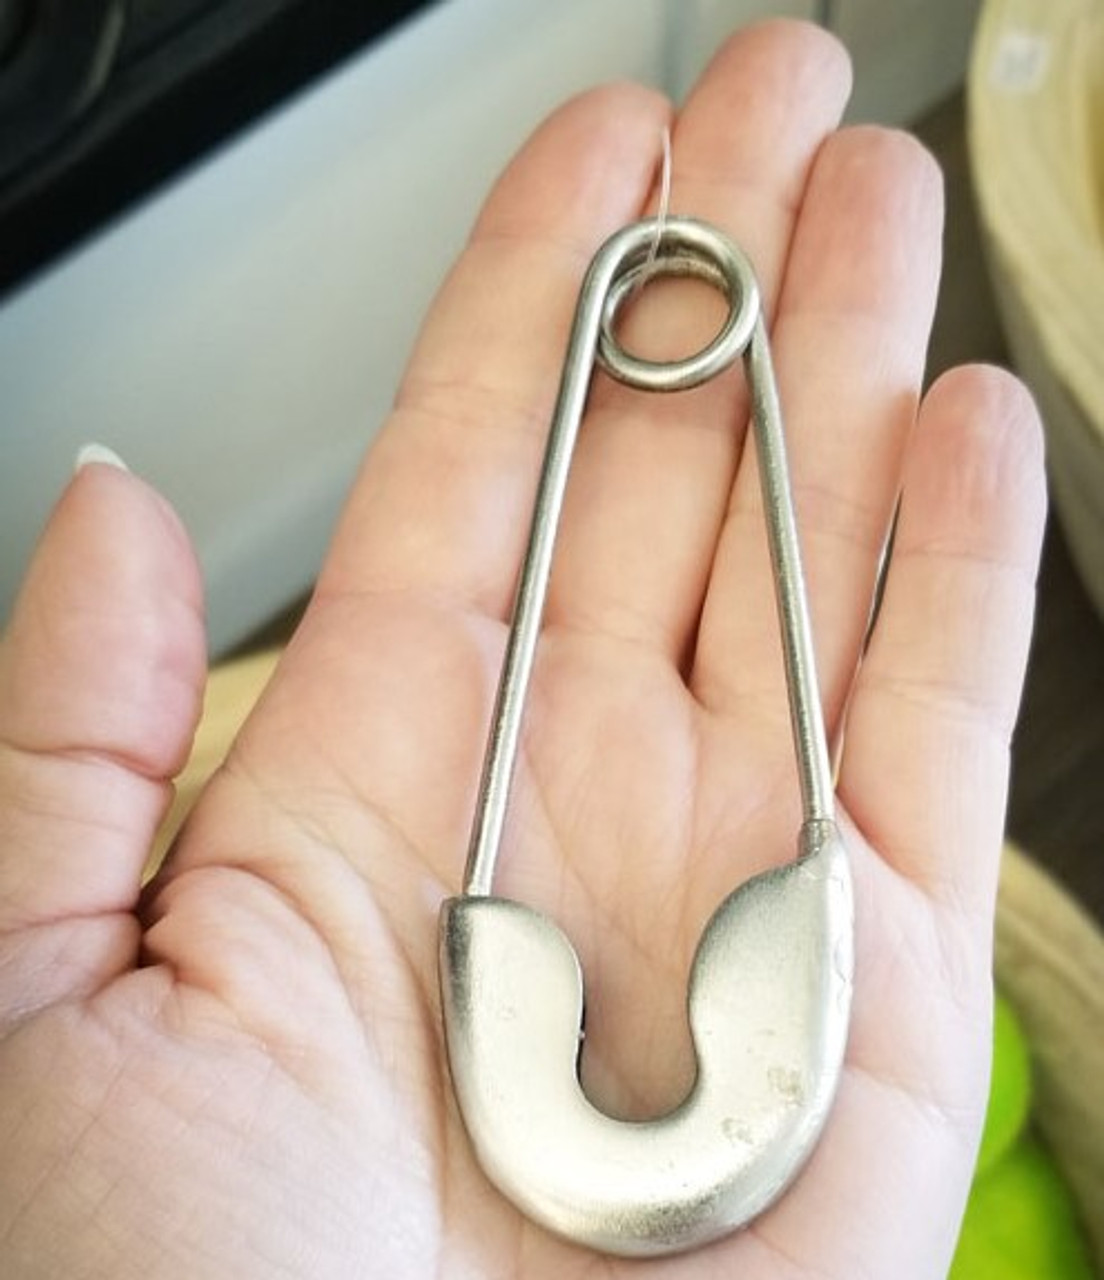 GIANT SAFETY PIN